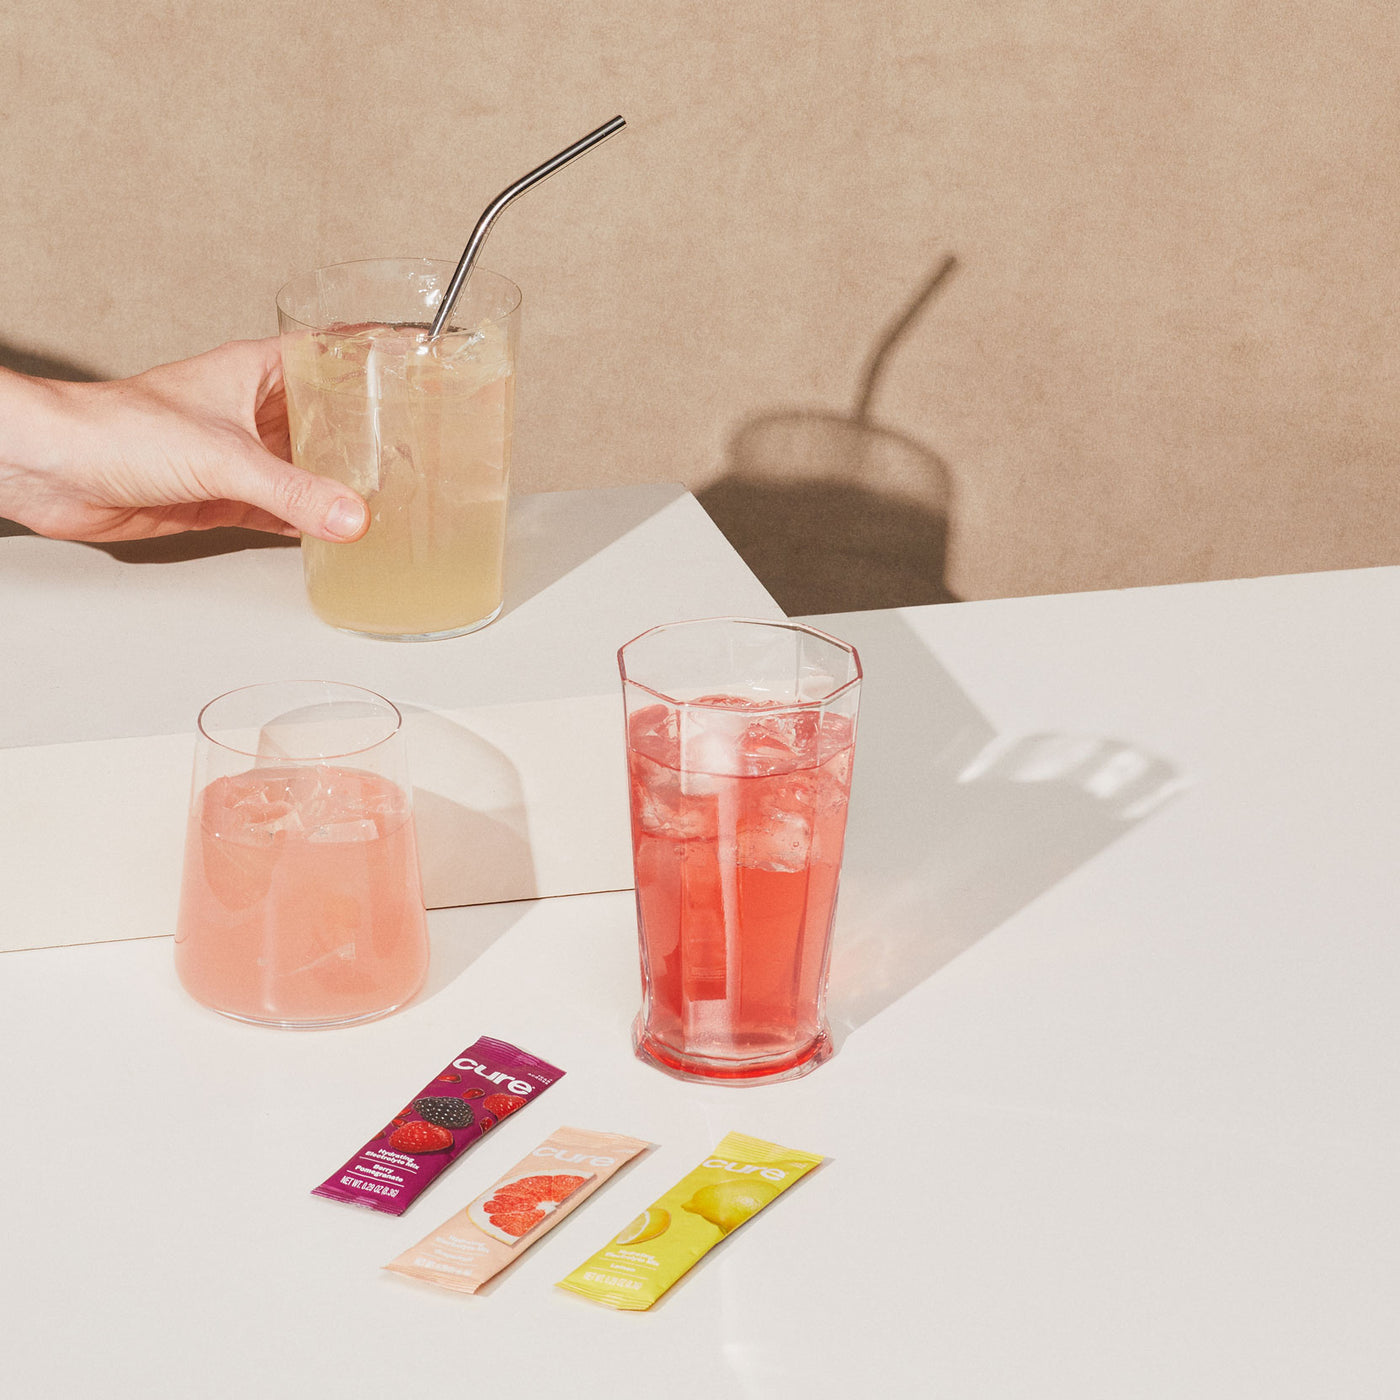 Hand holding yellow beverage, two more glasses (pink, red) with ice; 'Cure' packets in berry, grapefruit, lemonade, on a warm brown background.